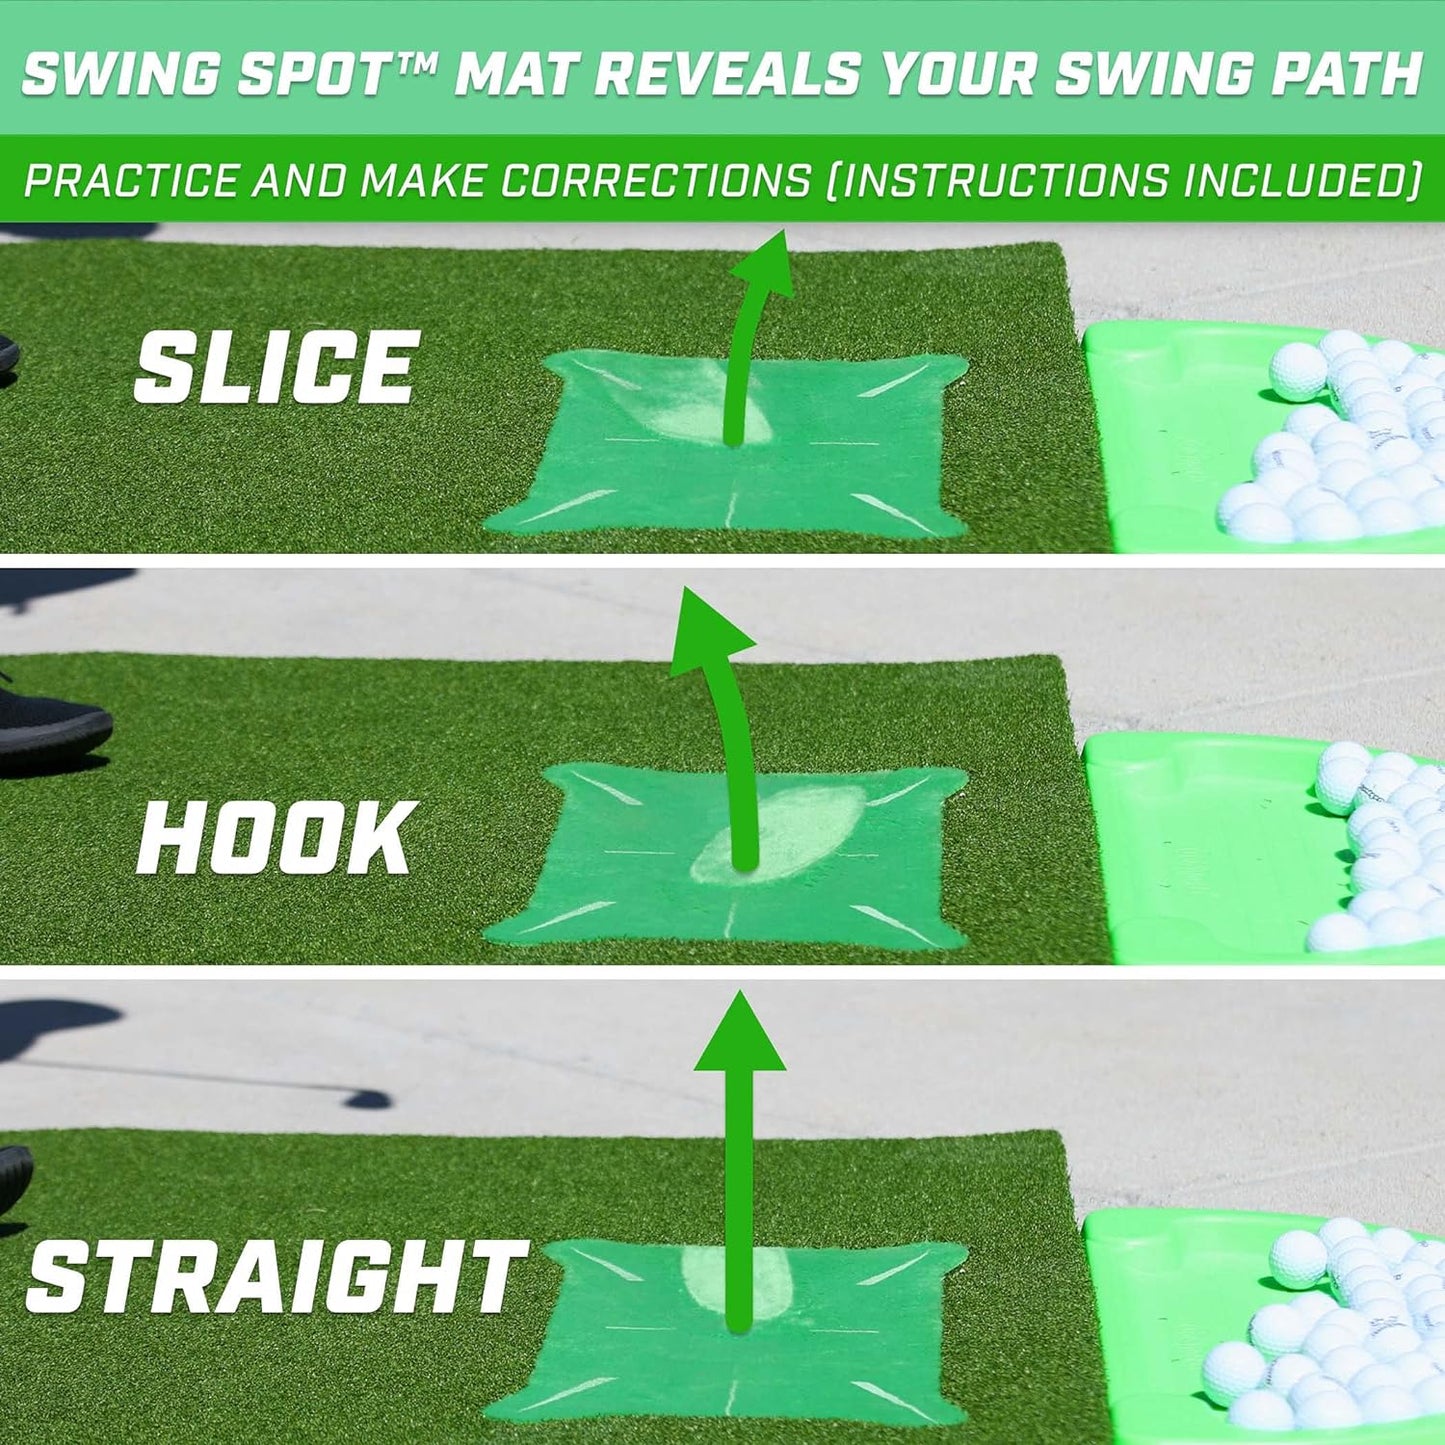 5 Ft X 4 Ft PRO Golf Practice Hitting Mat, Includes 5 Interchangeable Inserts for the Ultimate At-Home Instruction, Green